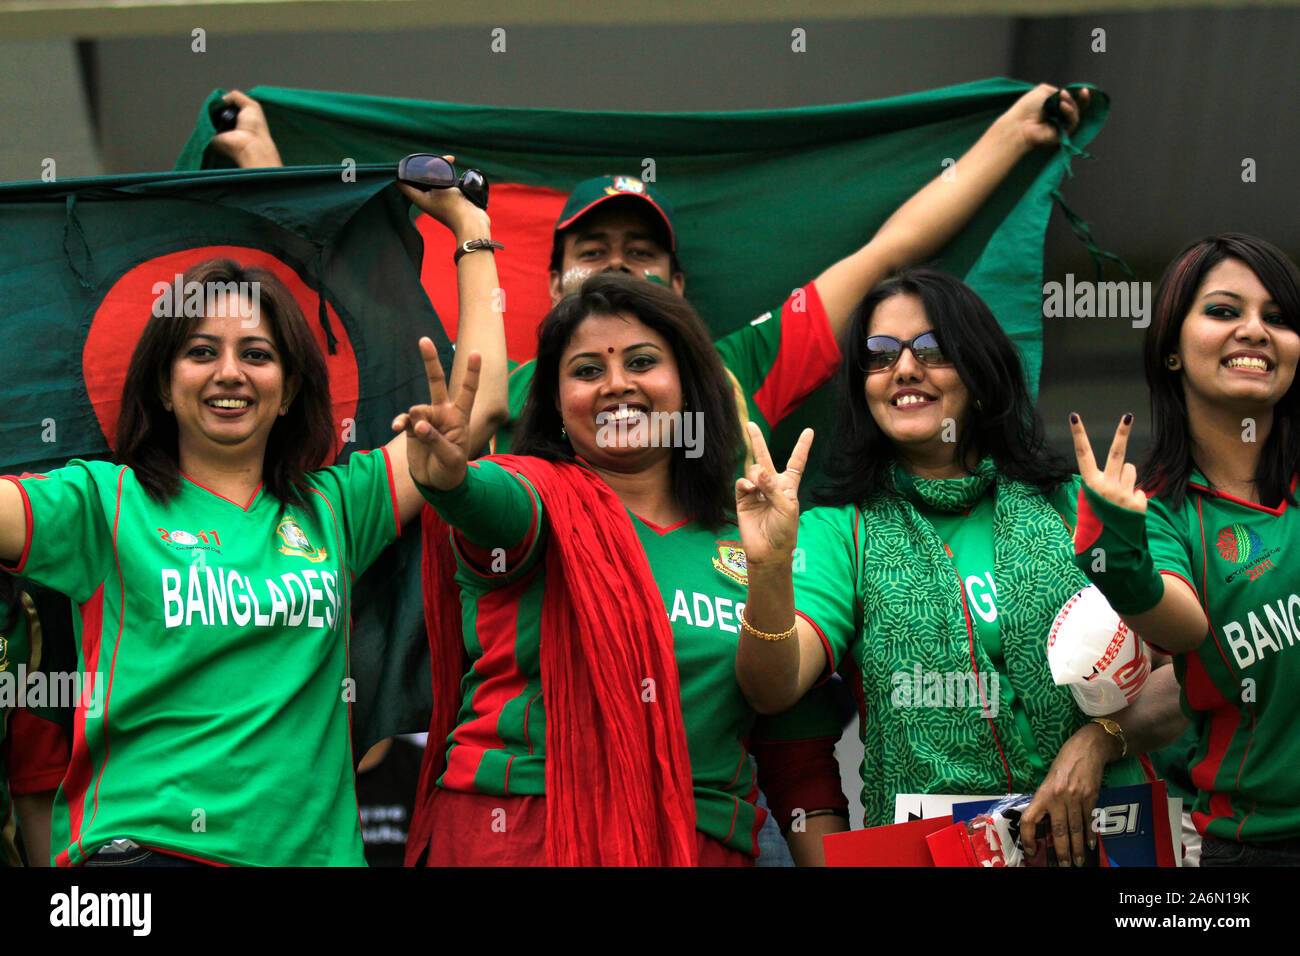 Bangladeshi cricket fans cheering for their team during the opening match of the 10th ICC Cricket World Cup, in Sher-e-Bangla National Stadium, on 19th February, 2011.  Mirpur, Dhaka, Bangladesh. Stock Photo